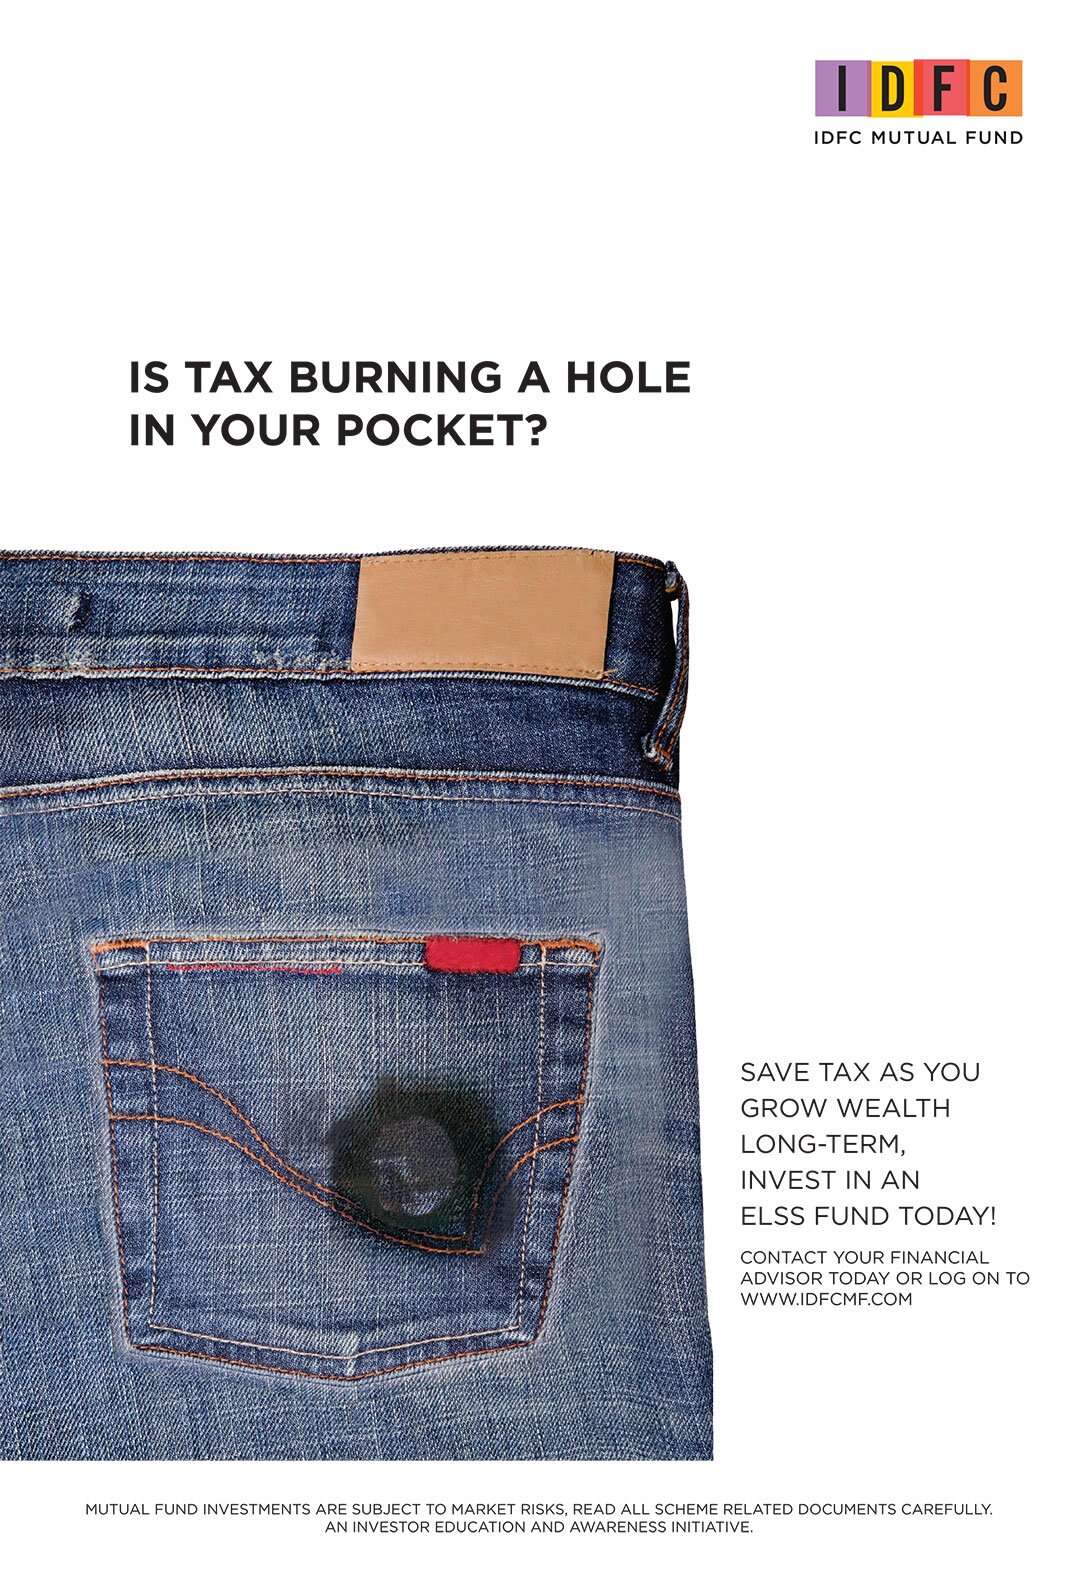 Is tax burning a hole in your pocket